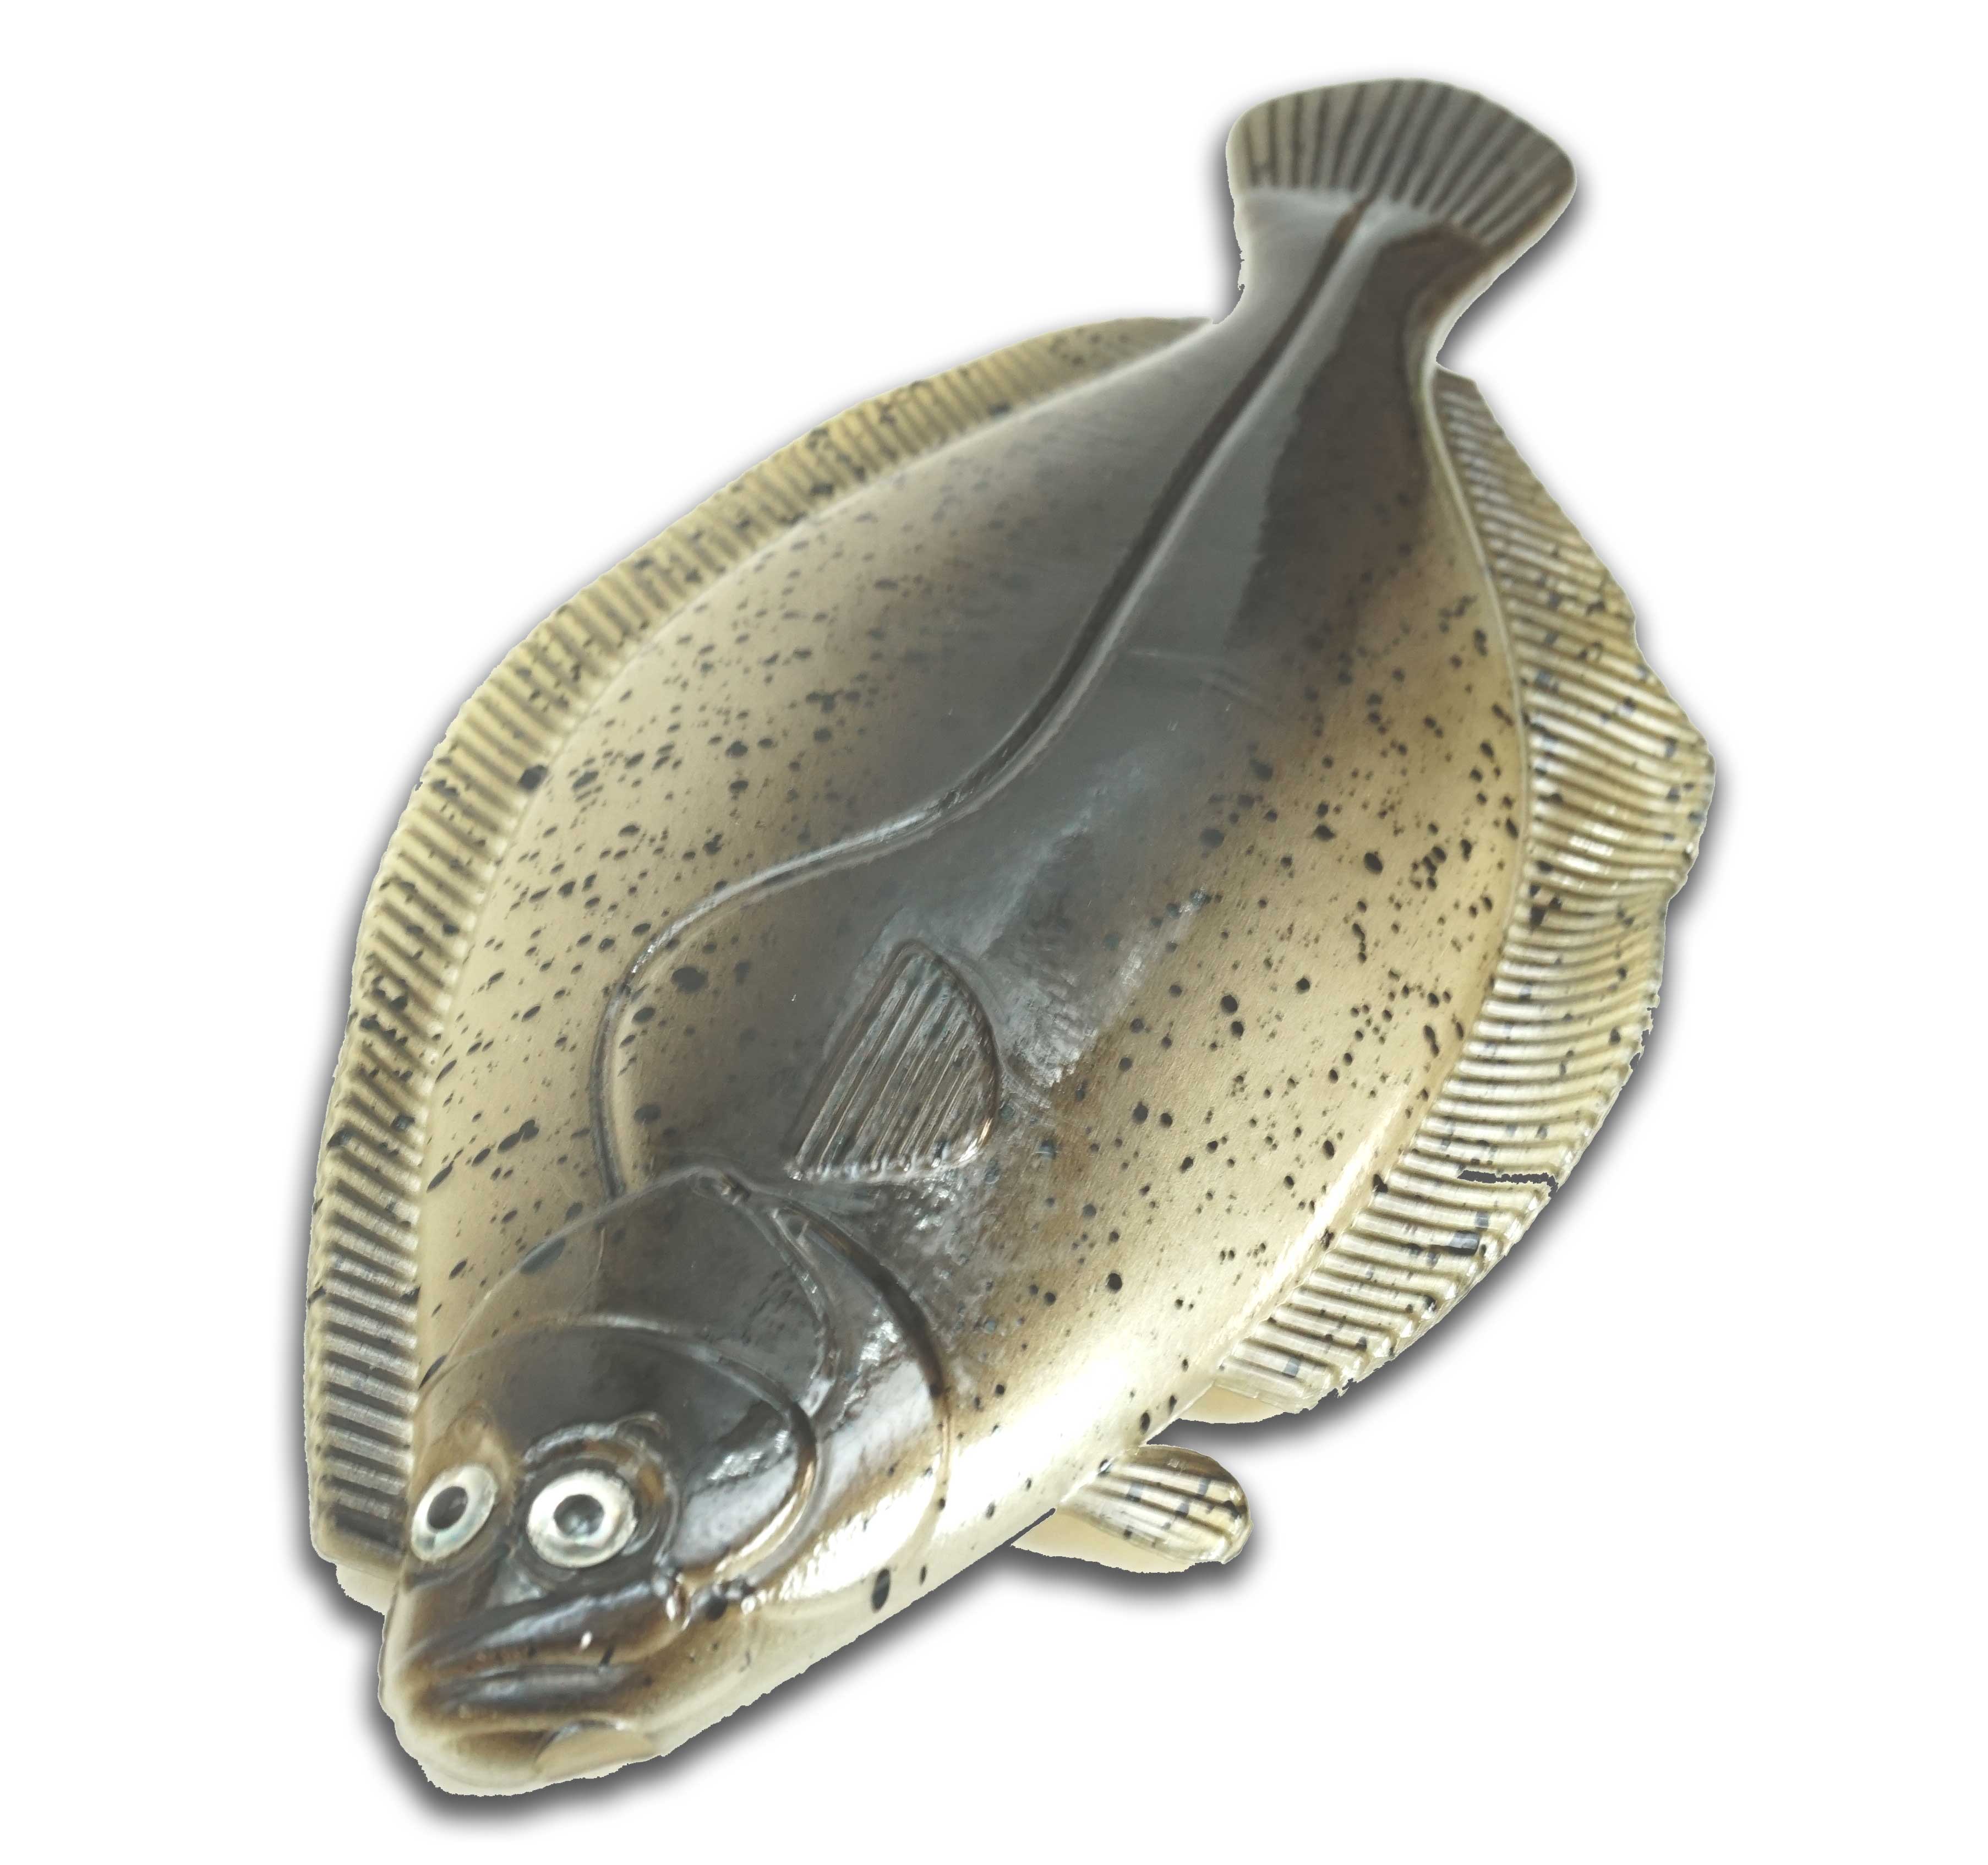 Artificial Flounder 6 Light Spotted - Almost Alive Lures